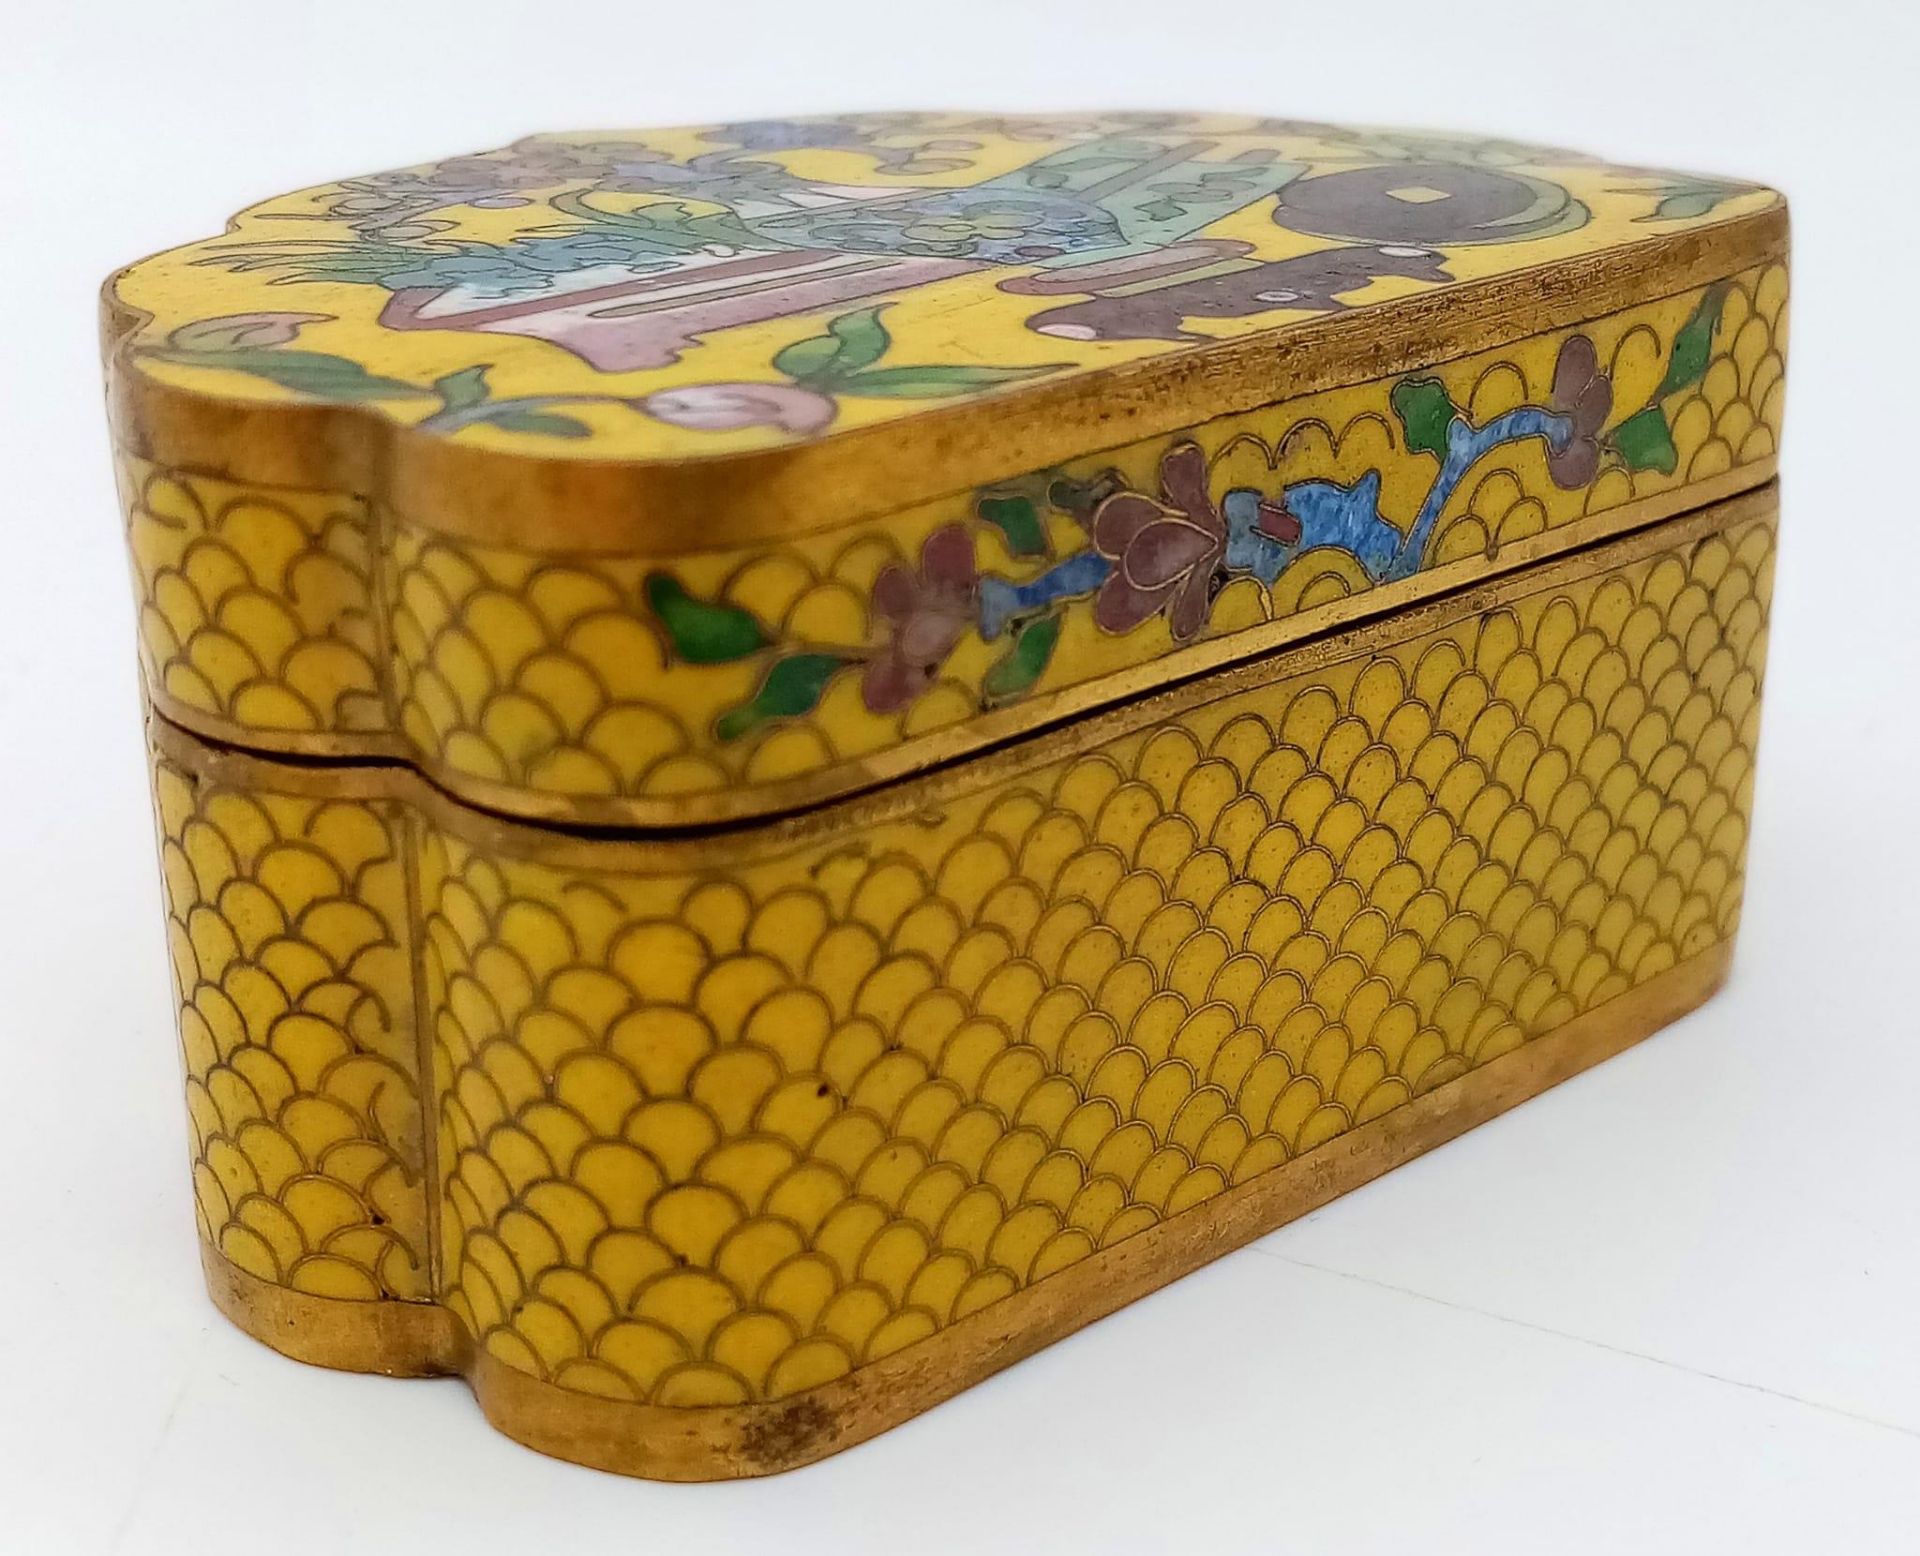 AN EXQUISITE EXAMPLE OF 19TH CENTURY CHINESE CLOISONNE WORK IN THE FORM OF A SMALL TRINKET BOX . - Image 4 of 6